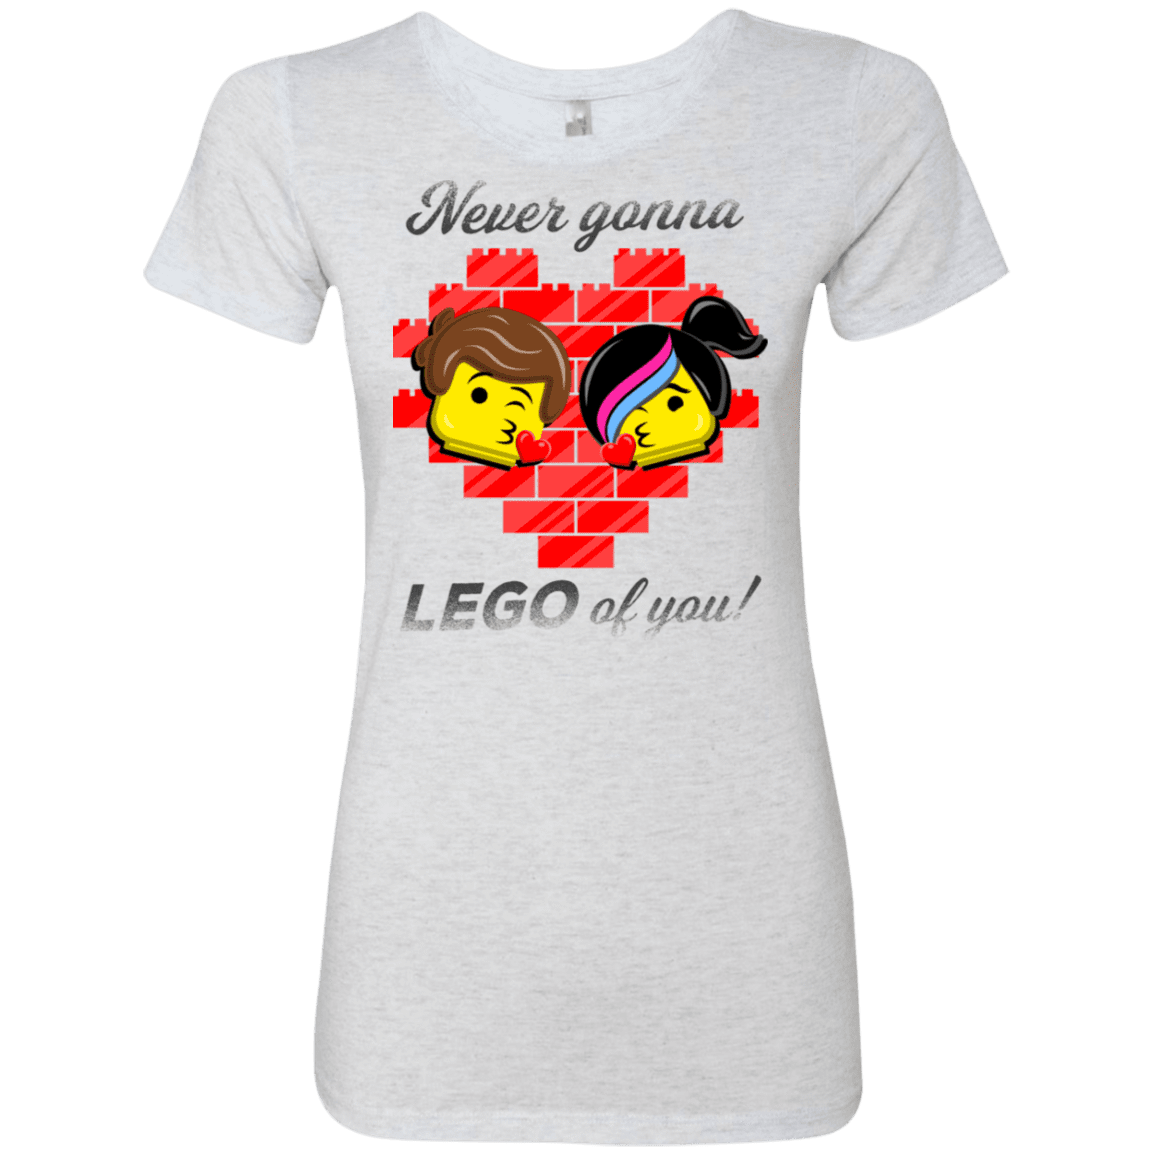 T-Shirts Heather White / S Never LEGO of You Women's Triblend T-Shirt